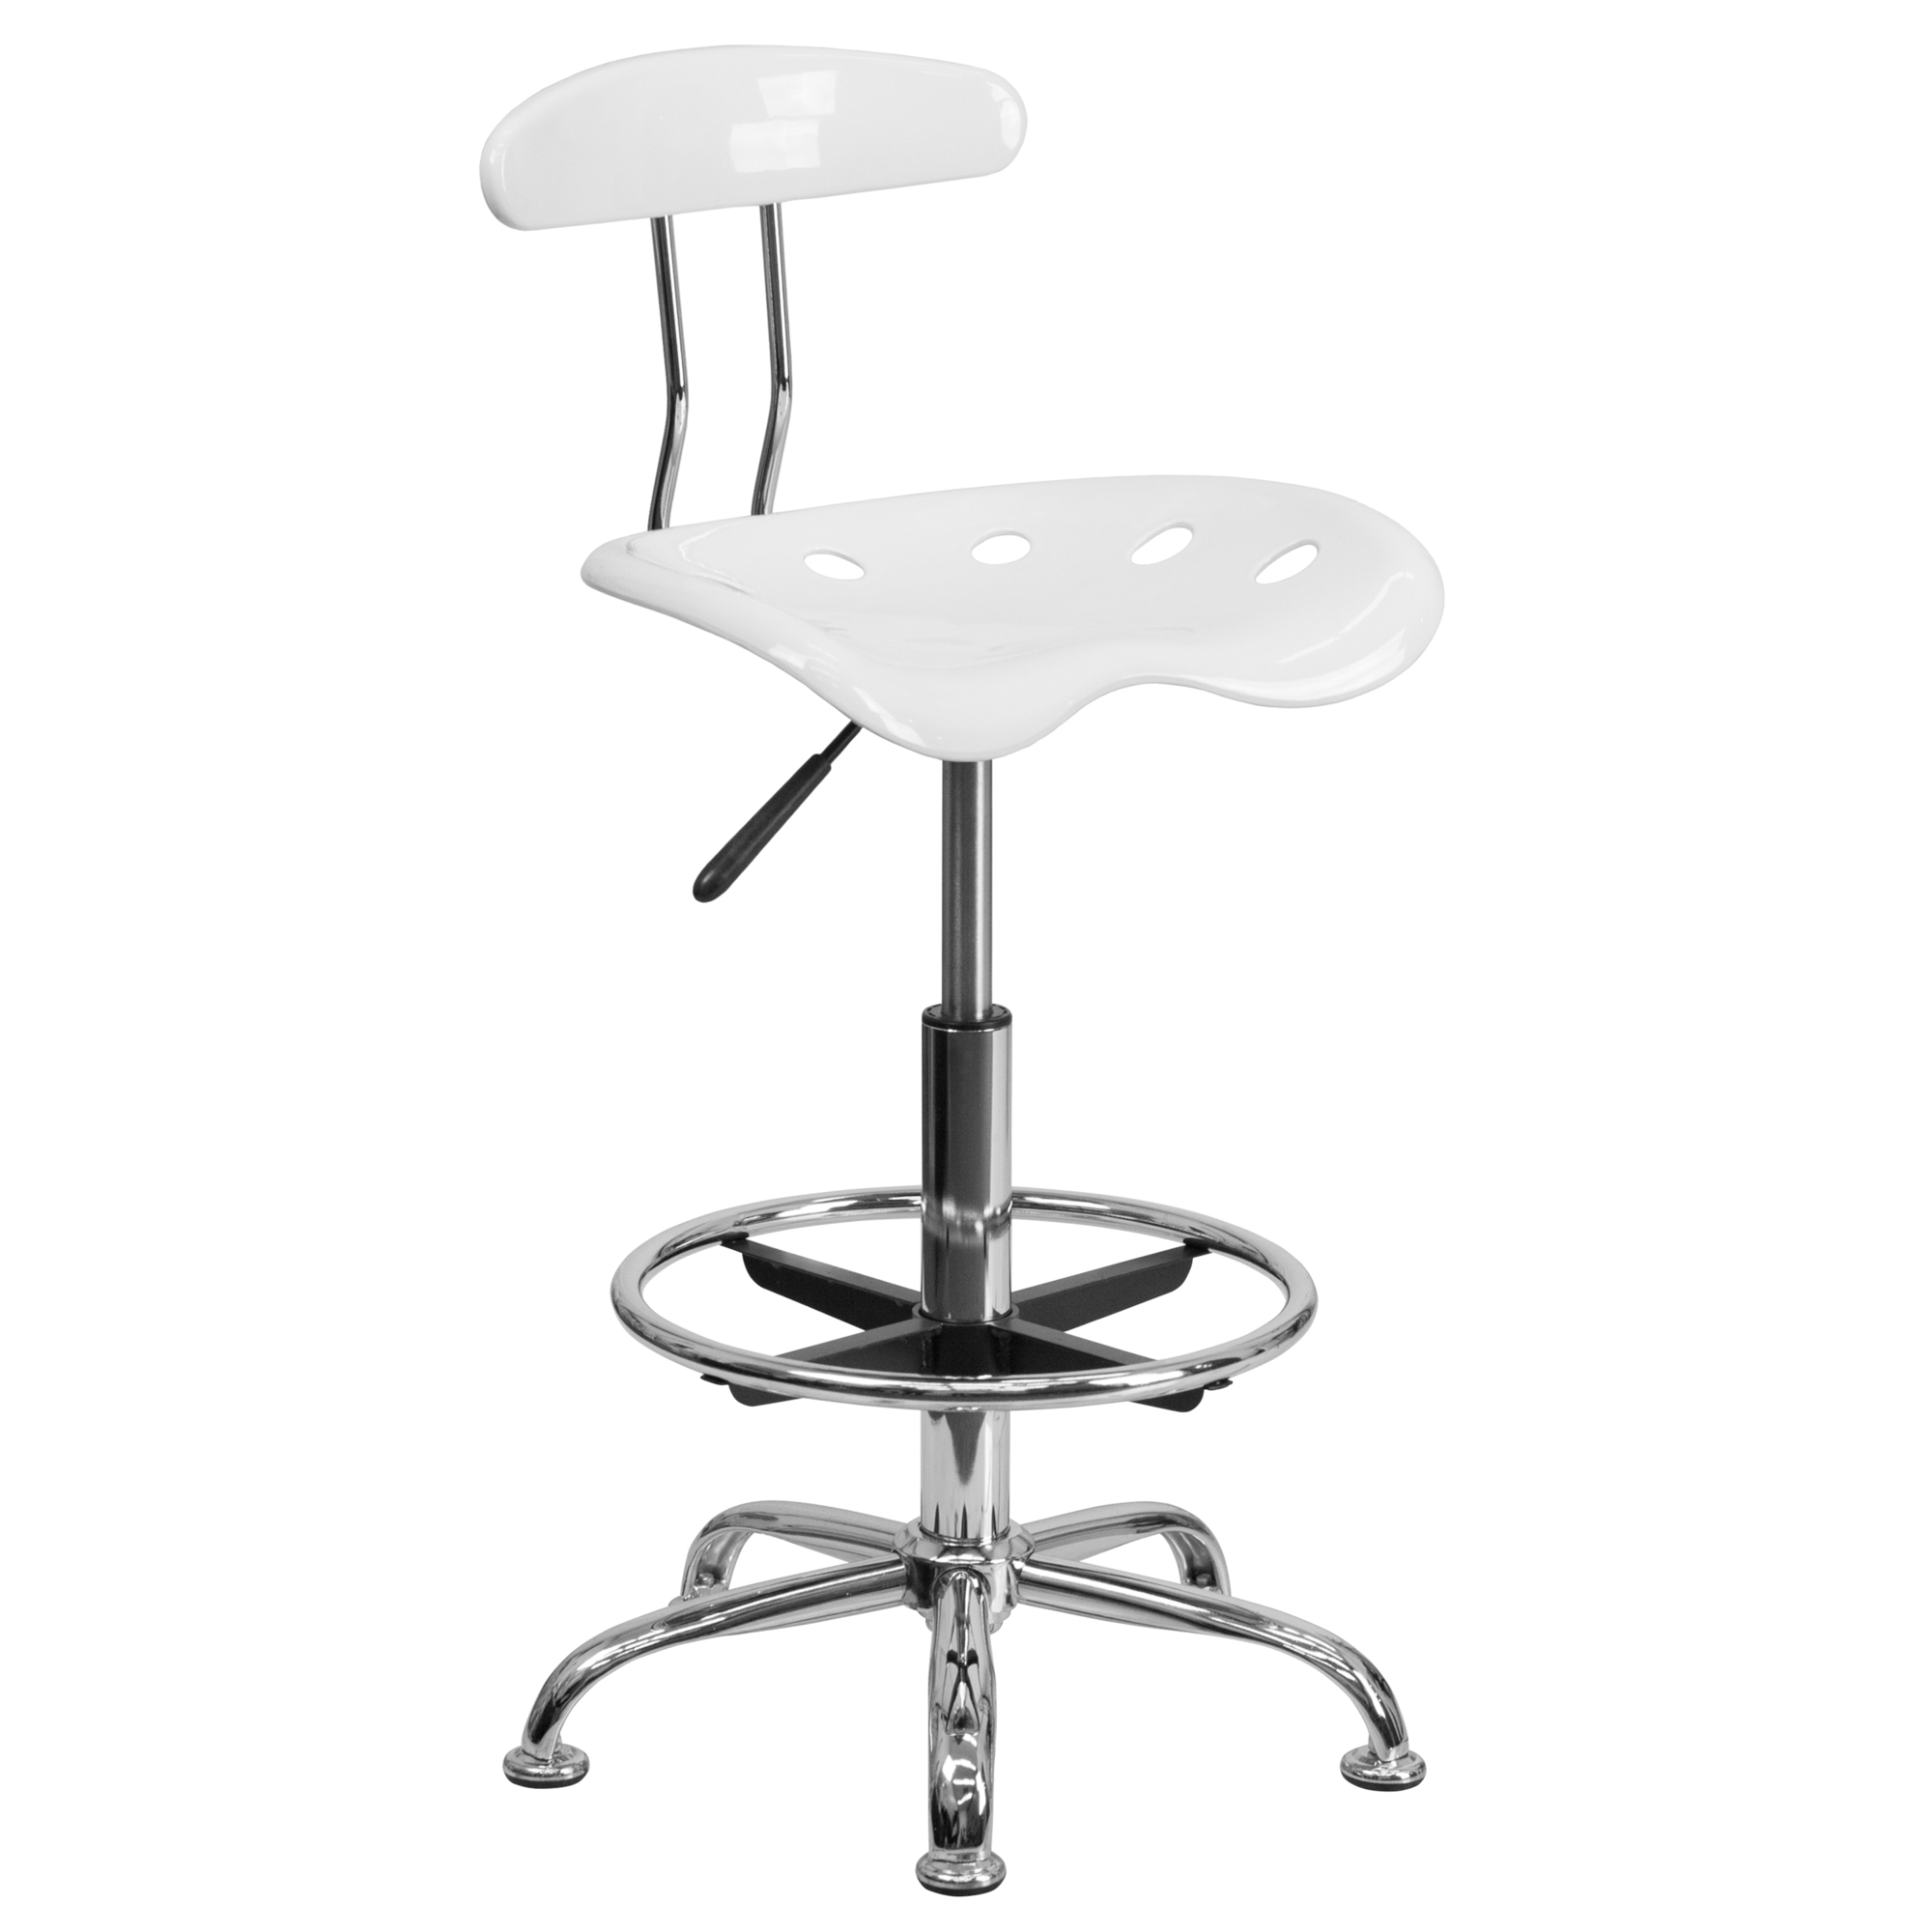 Flash Furniture, Vibrant White and Chrome Drafting Stool, Primary Color White, Included (qty.) 1, Model LF215WHITE